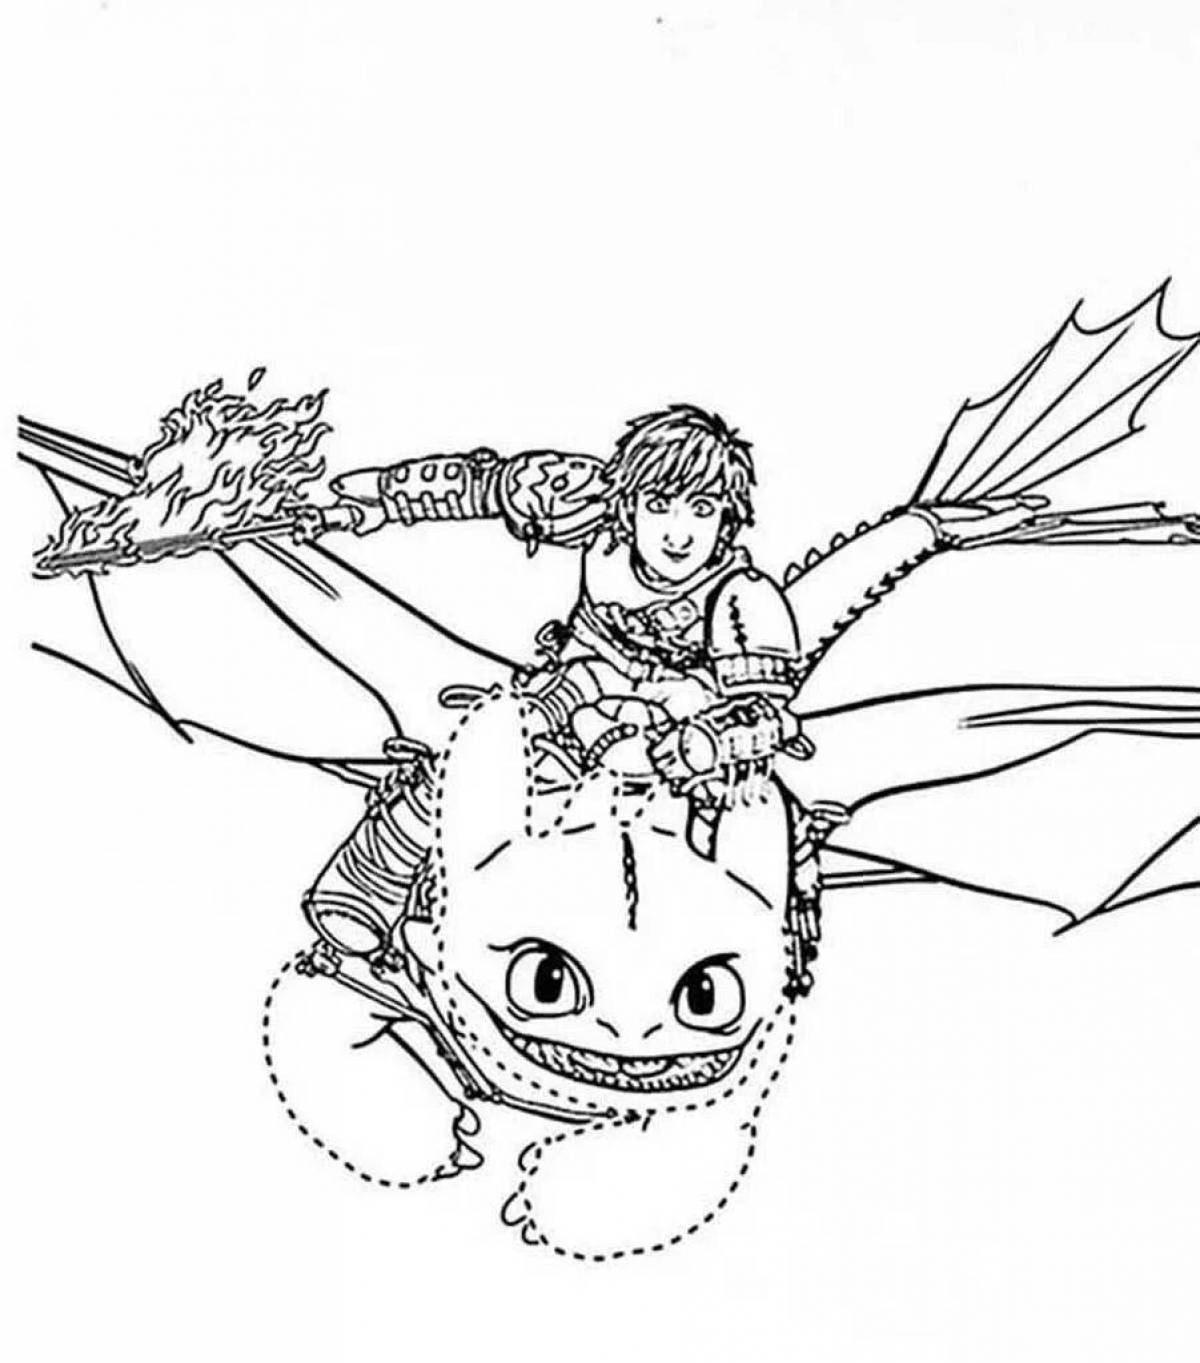 Fabulous toothless coloring book